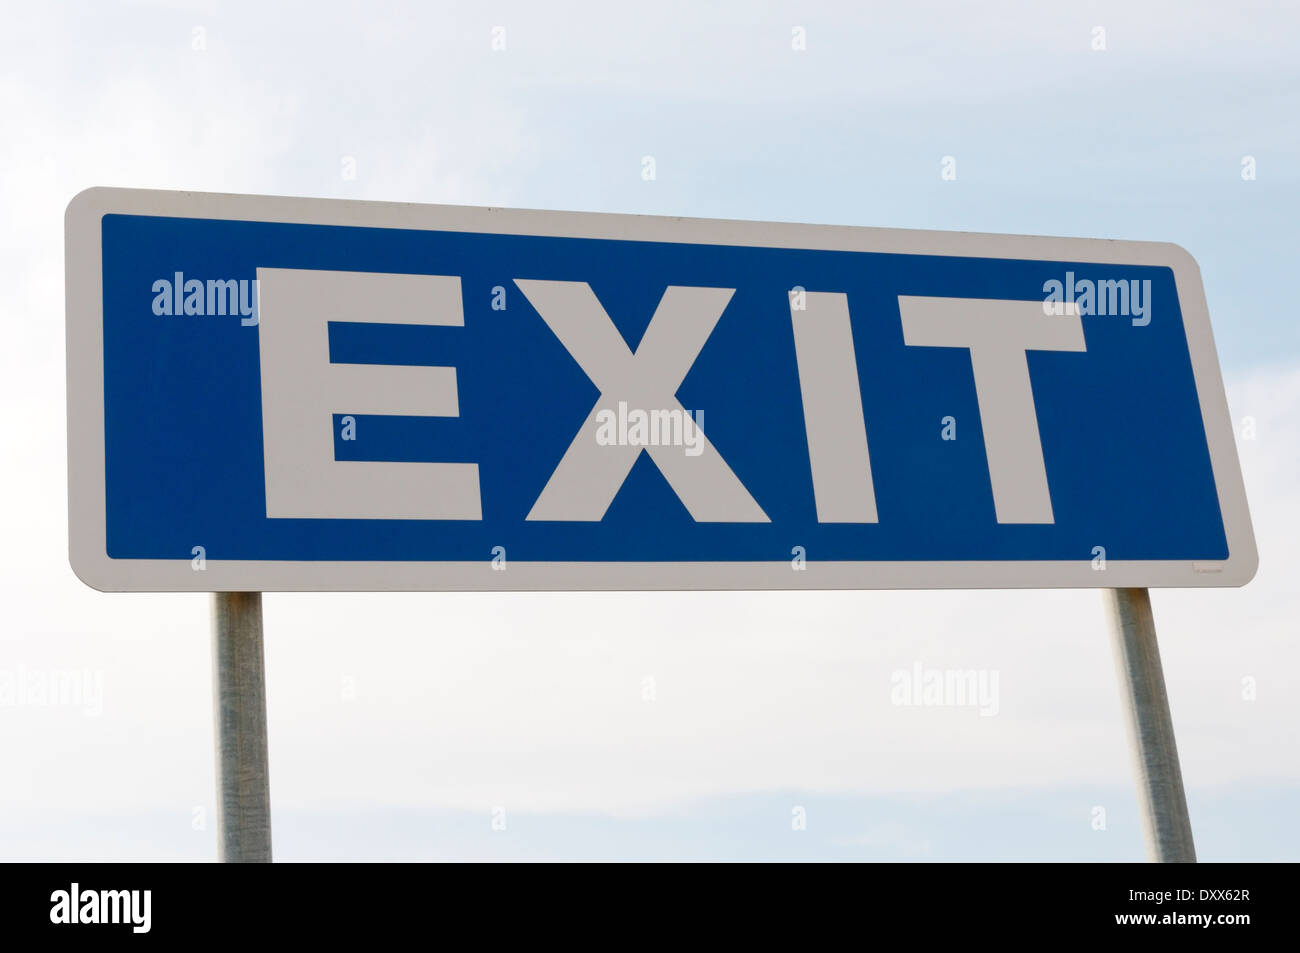 A large blue and white Exit sign against a clear blue sky. Stock Photo